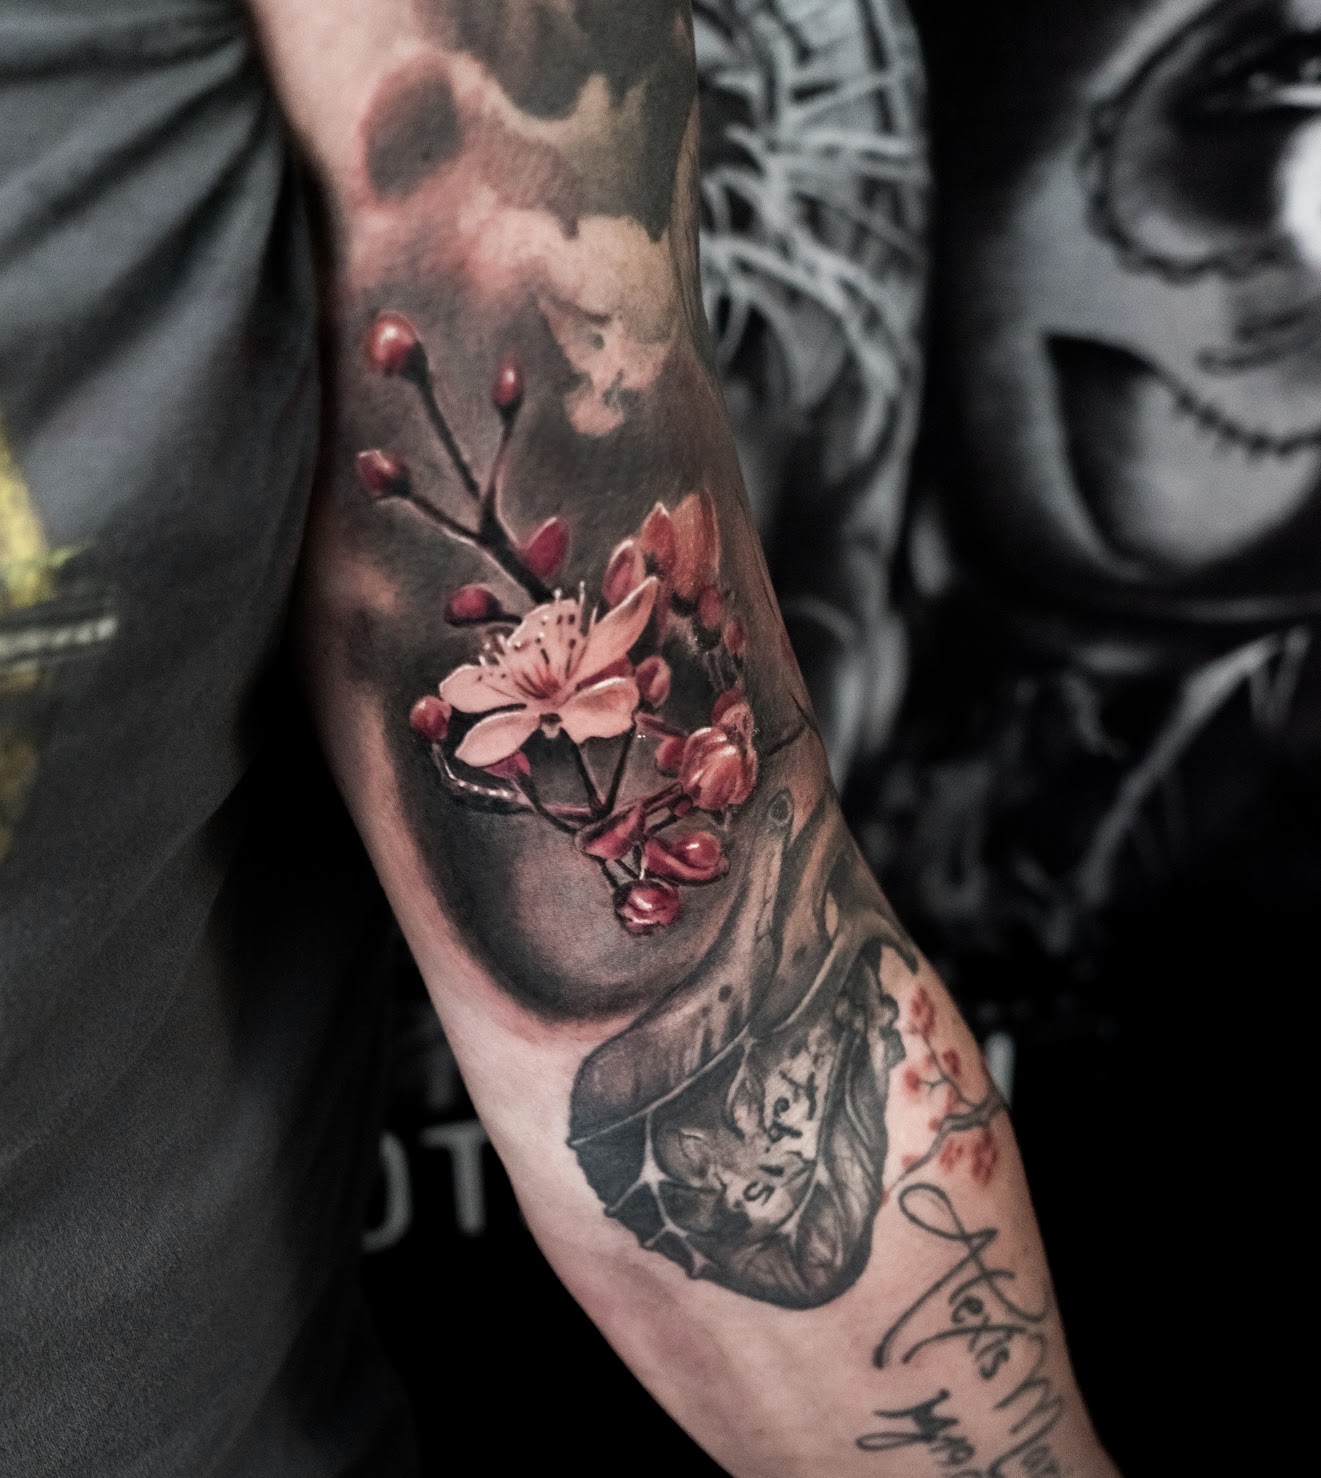 Photorealistic flower tattoo by Scoot Ink